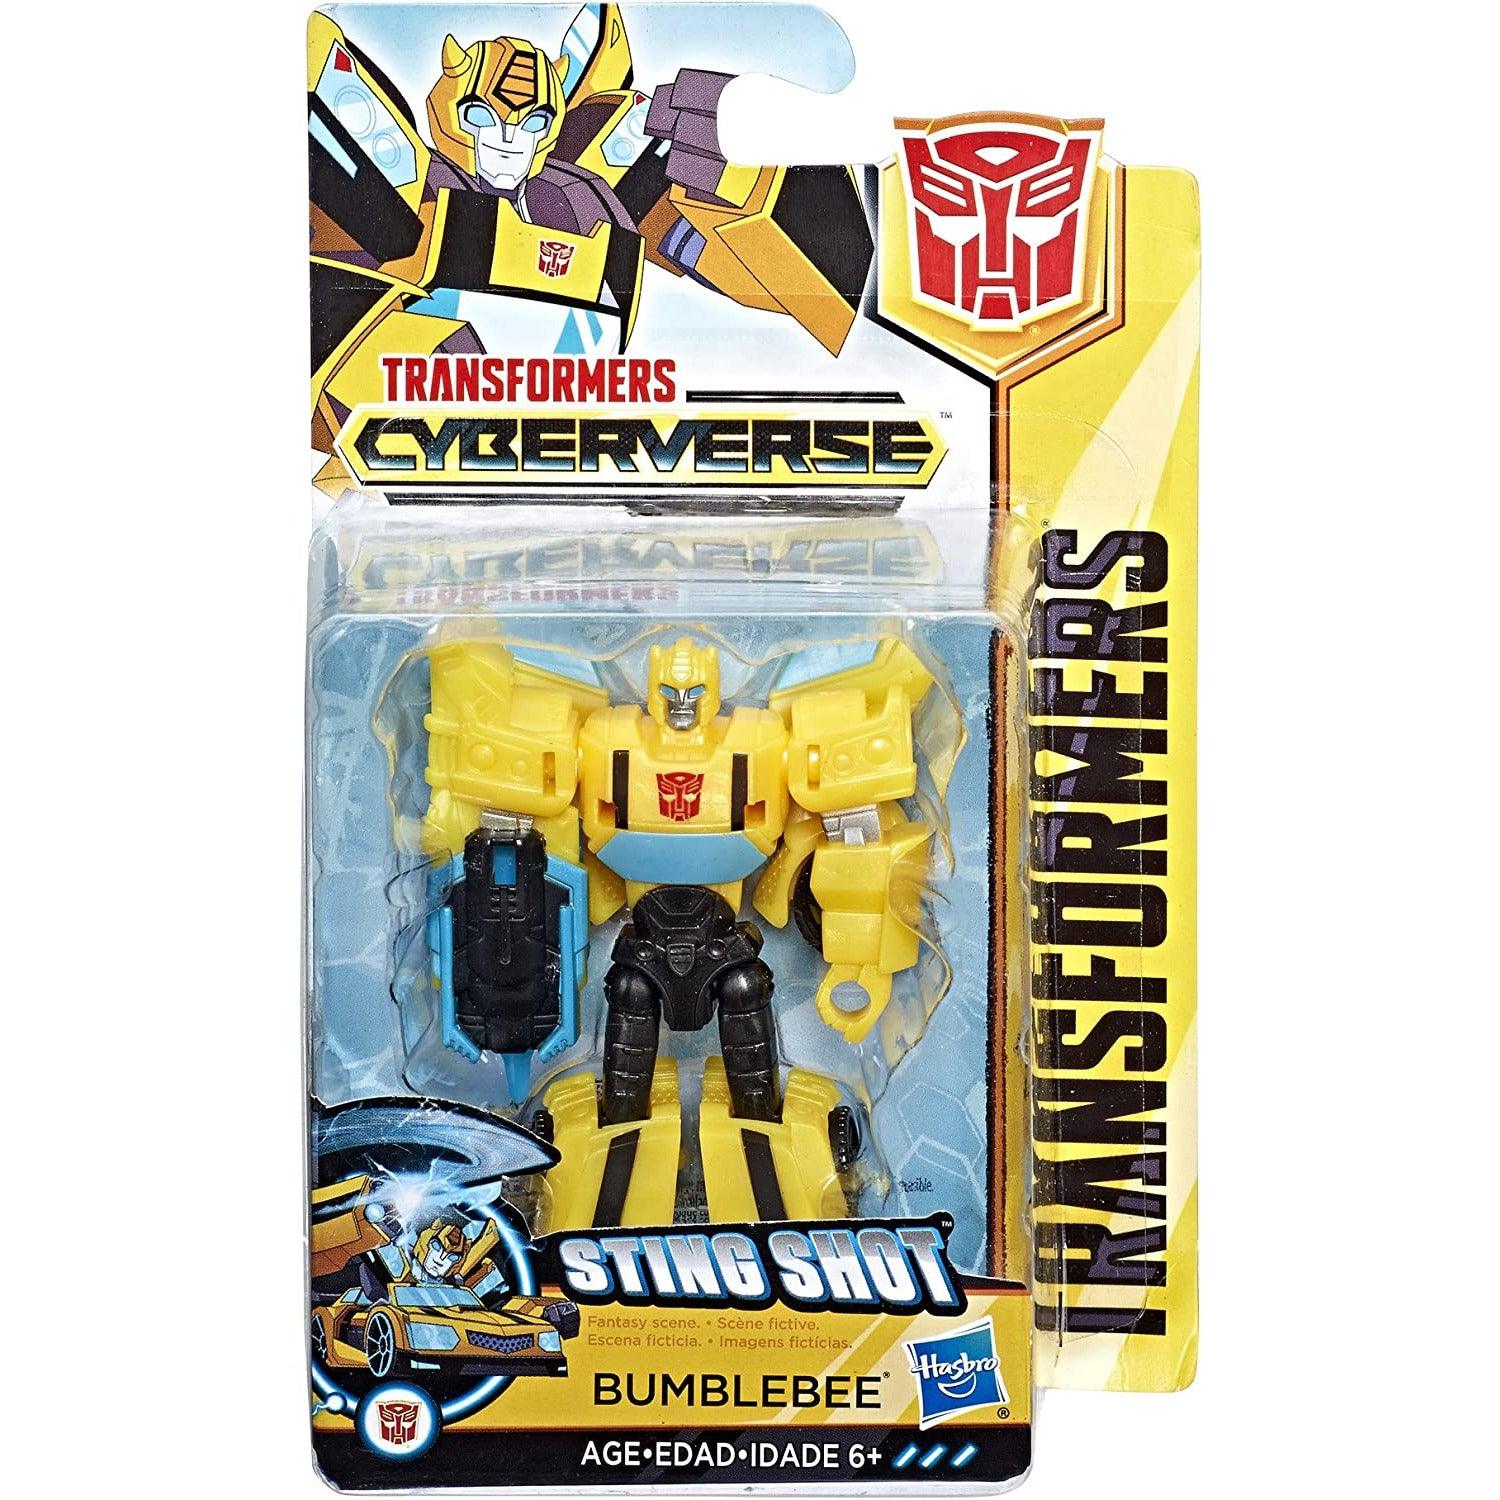 Transformers Bumblebee Cyberverse Adventures Action Attackers Warrior Class Bumblebee Sting Shot Move 5.4 Inch